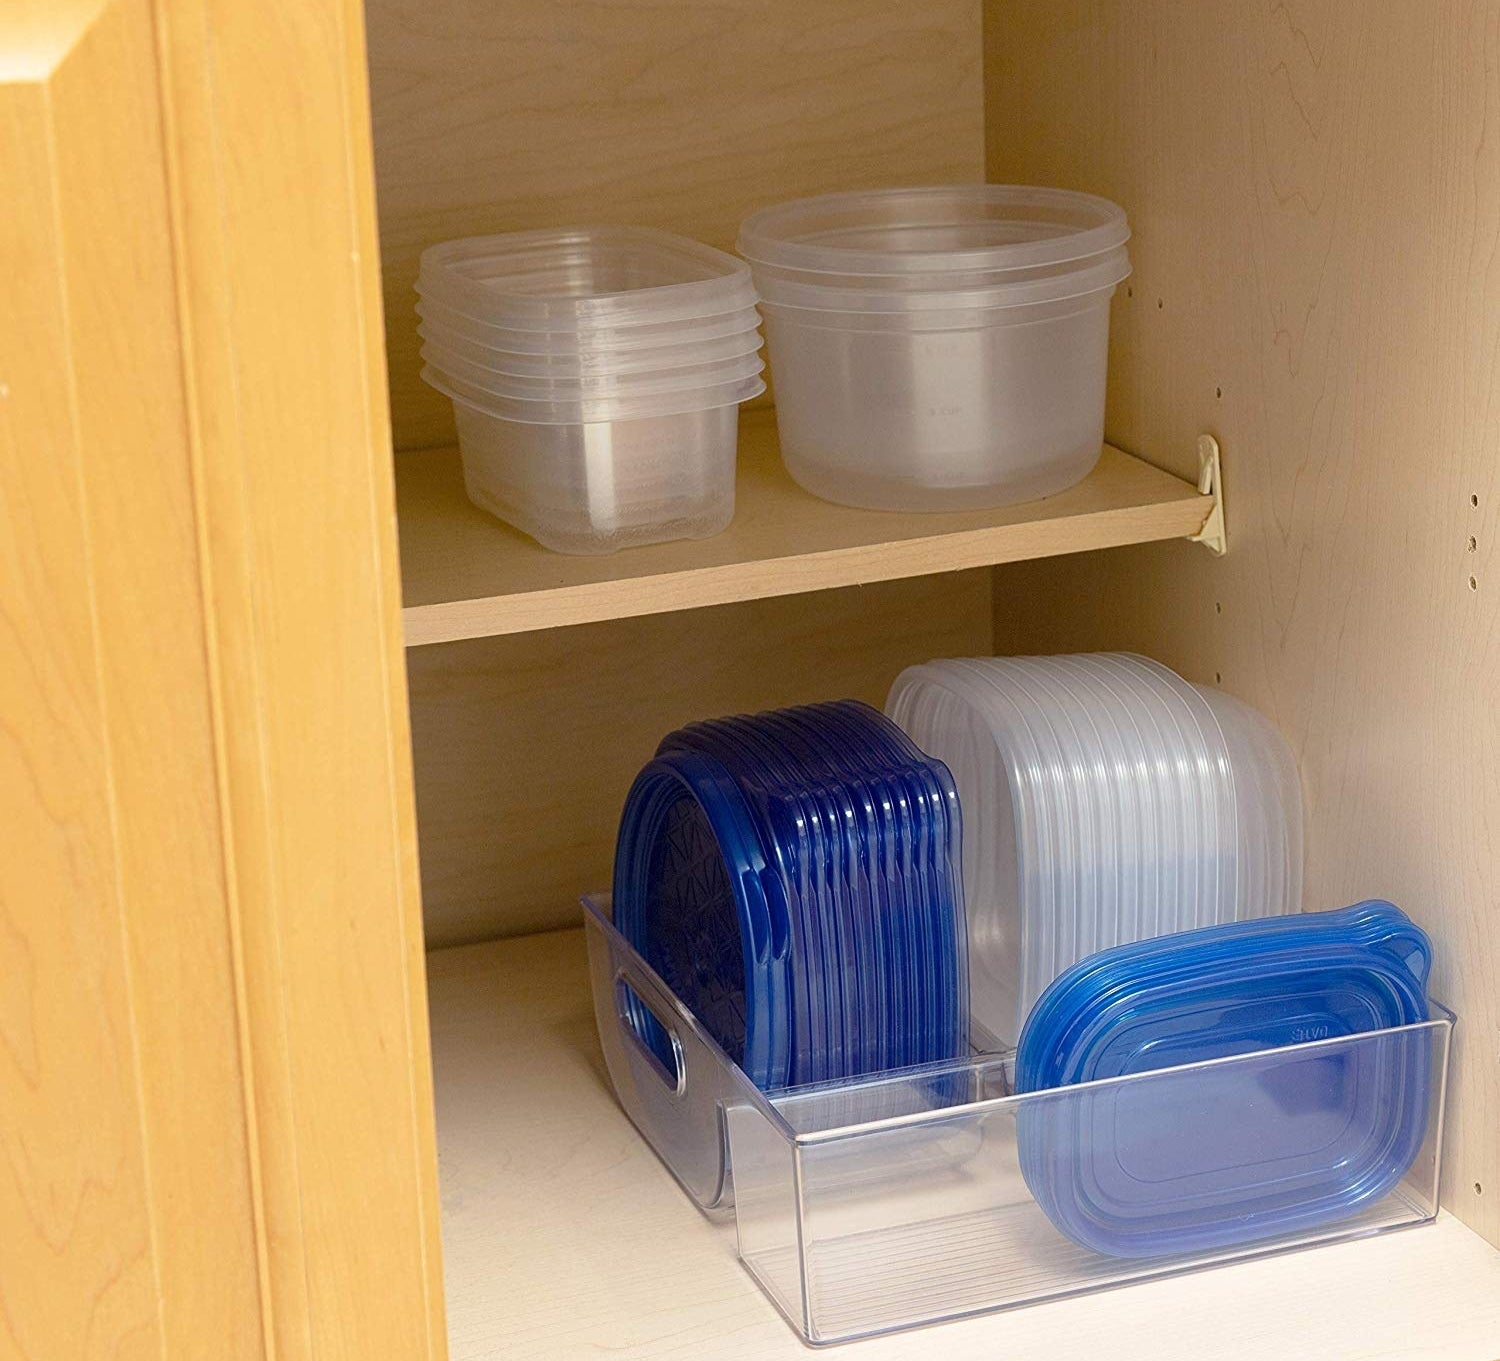 The organizer with lids and tupperwares in compartments